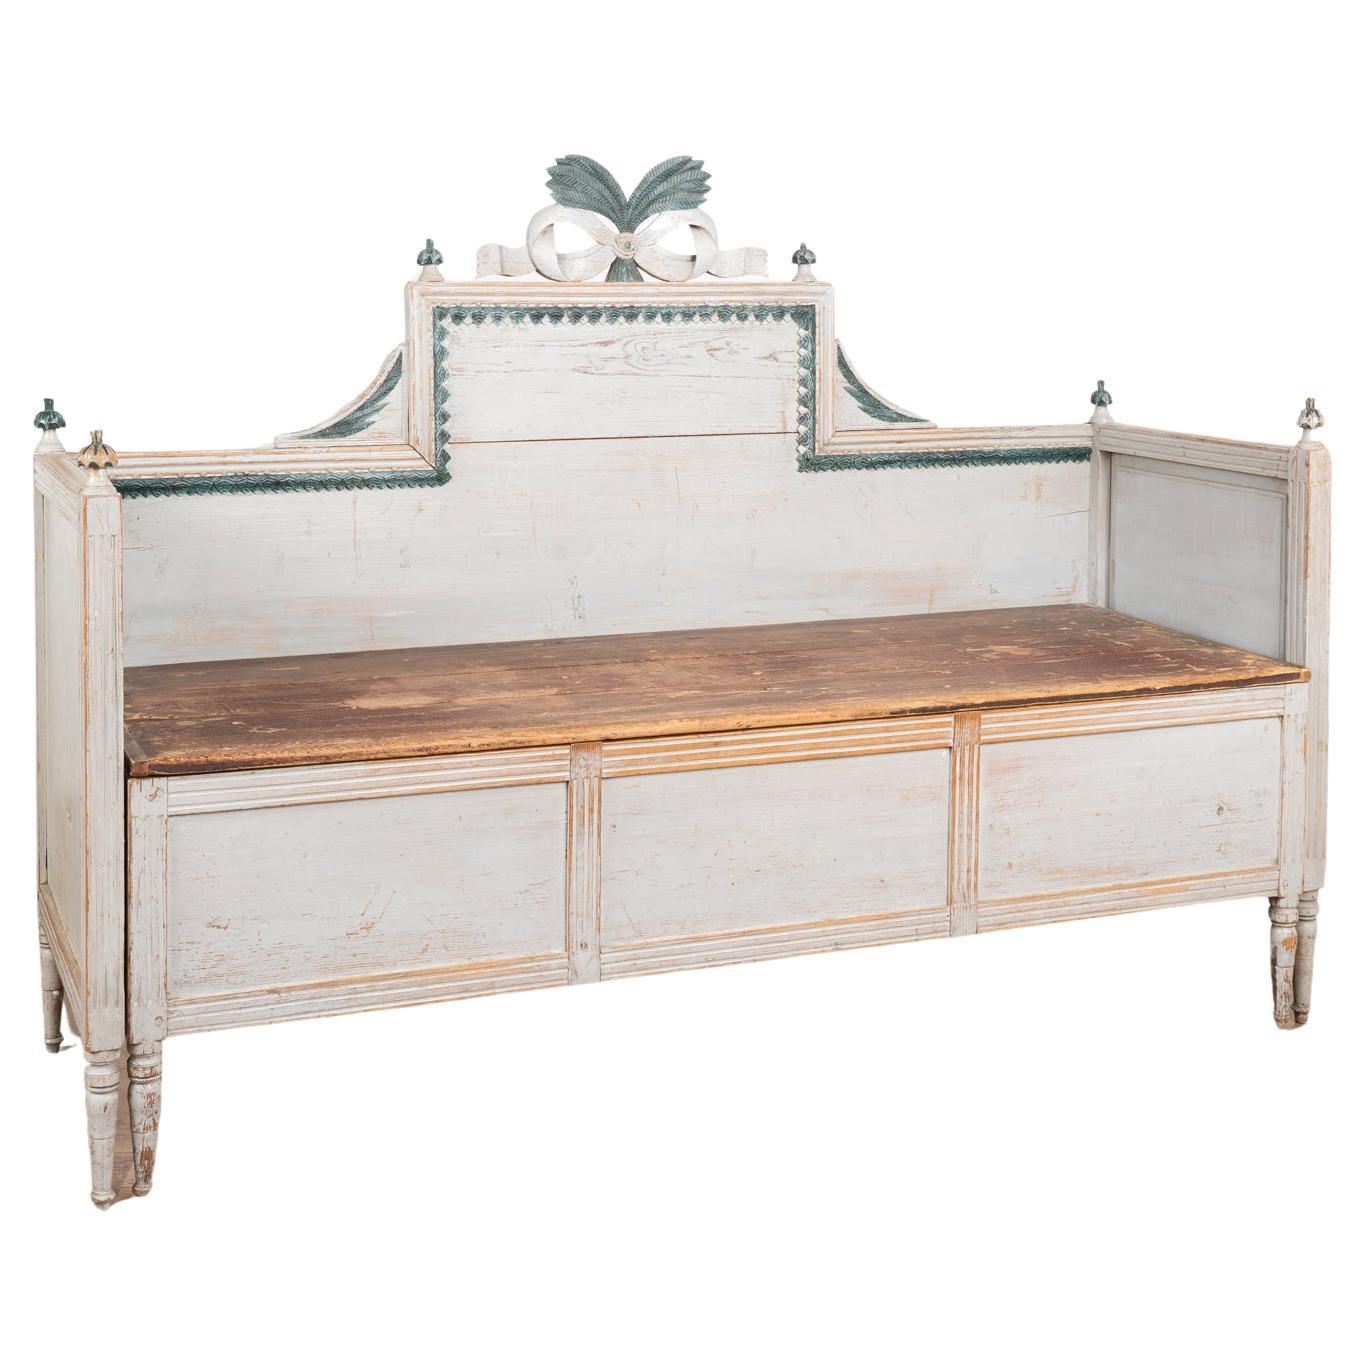 Original Gray Painted Gustavian Bench with Storage, Sweden circa 1820-40 For Sale